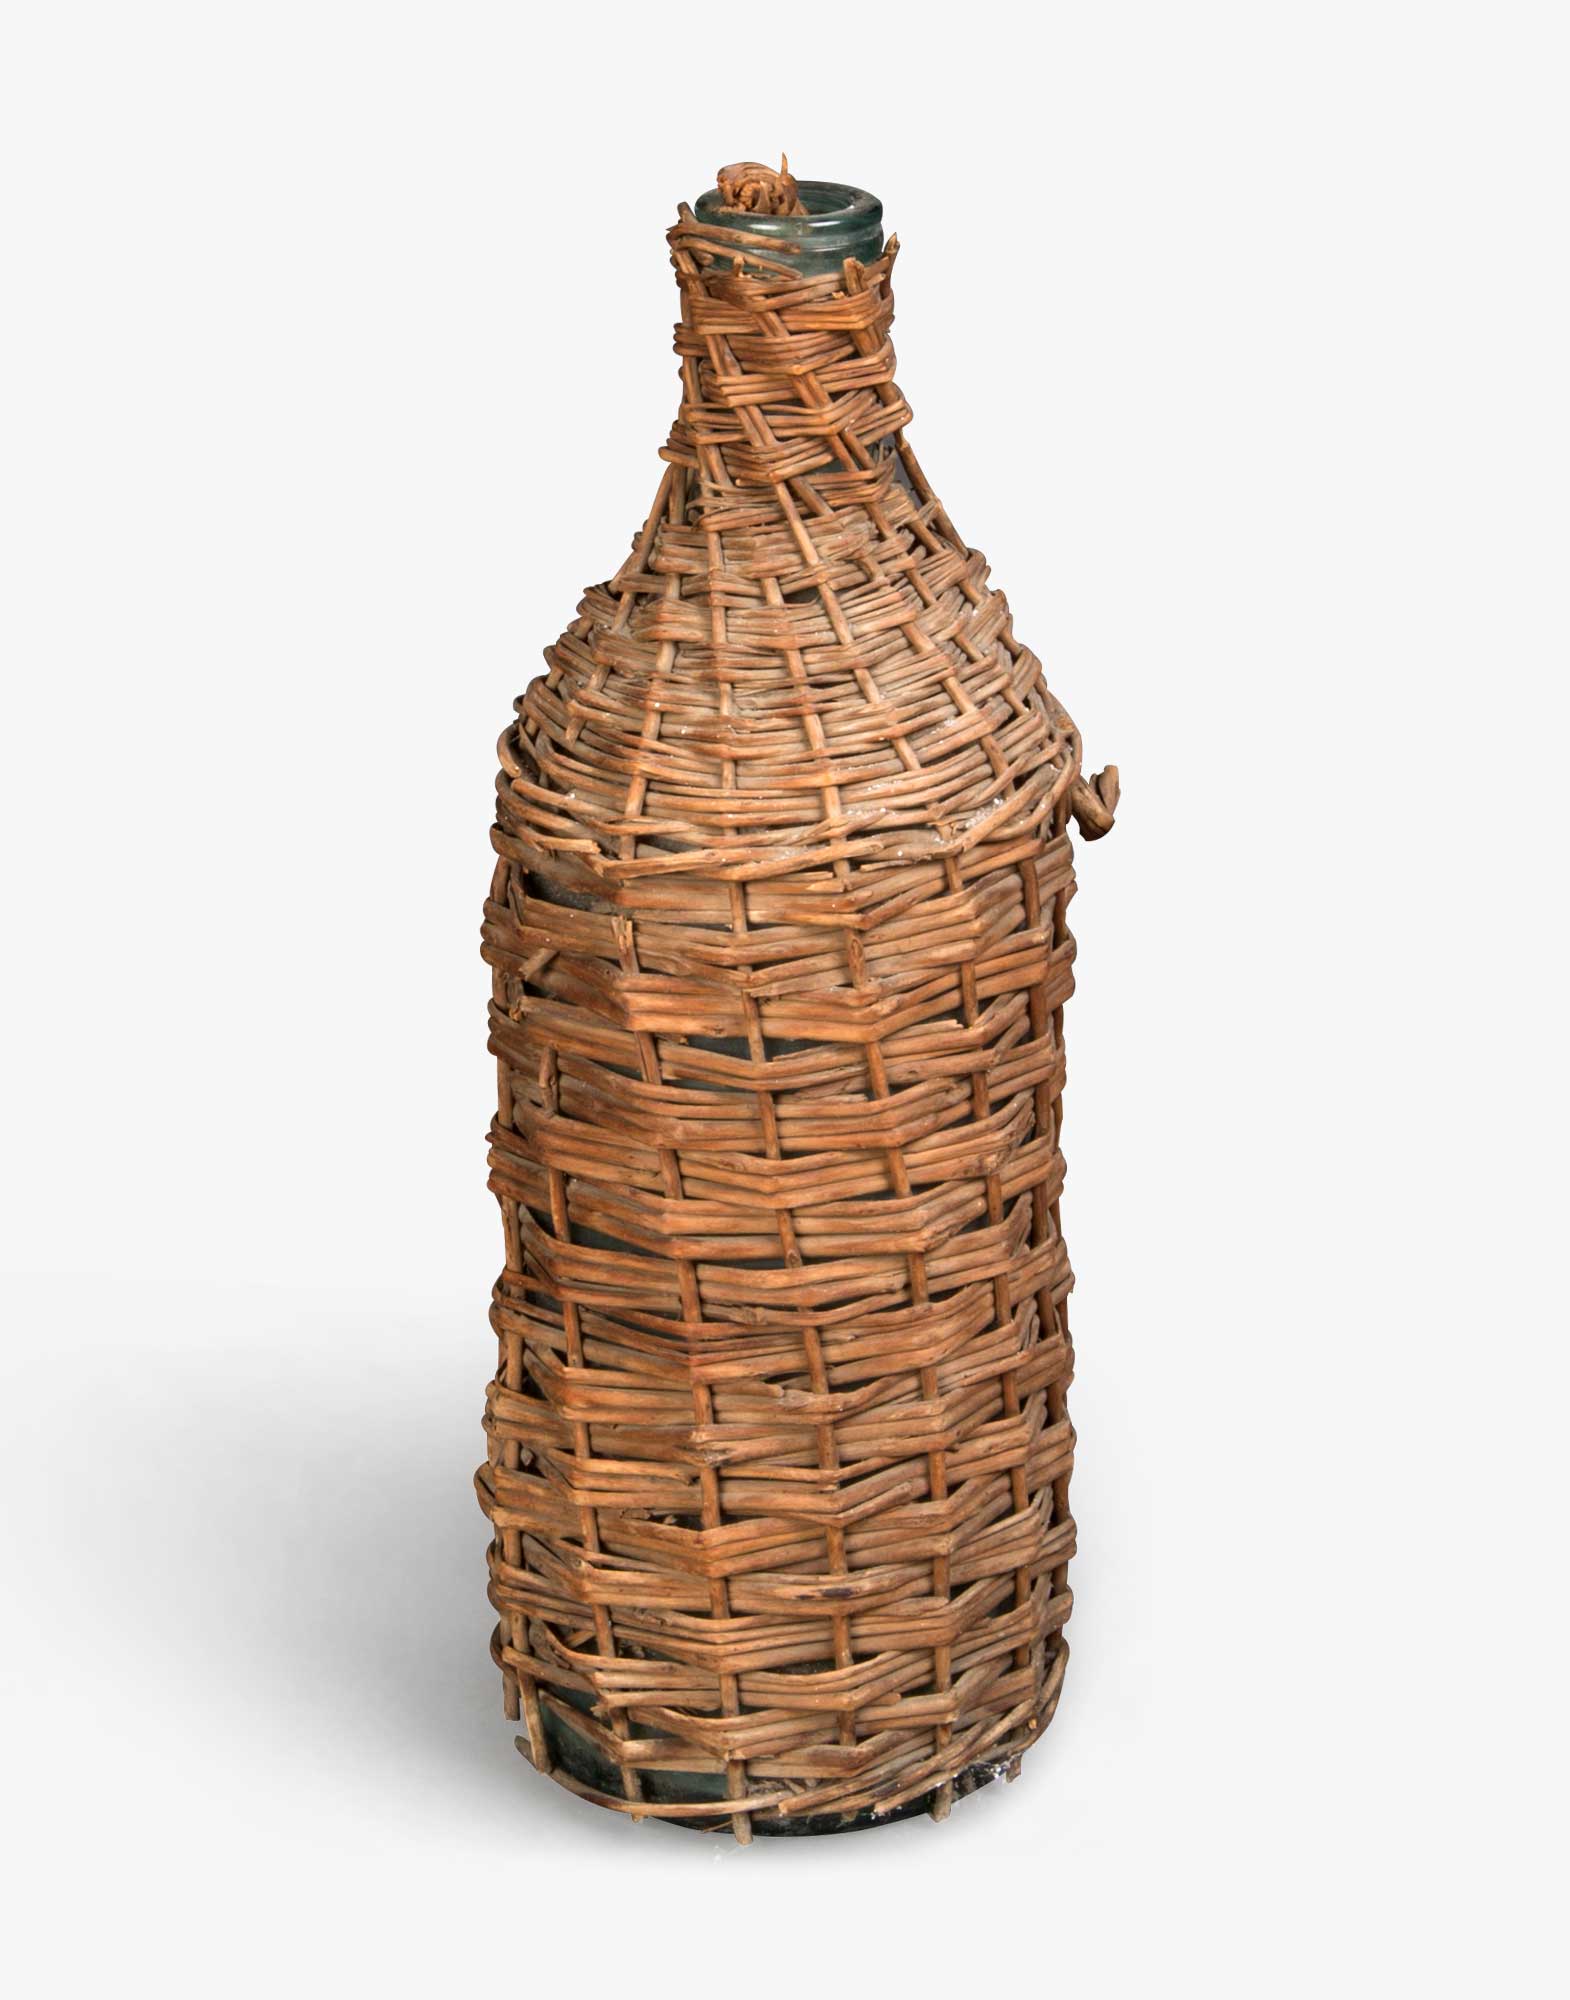 Antique Olive Oil Bottle With Wicker Casing